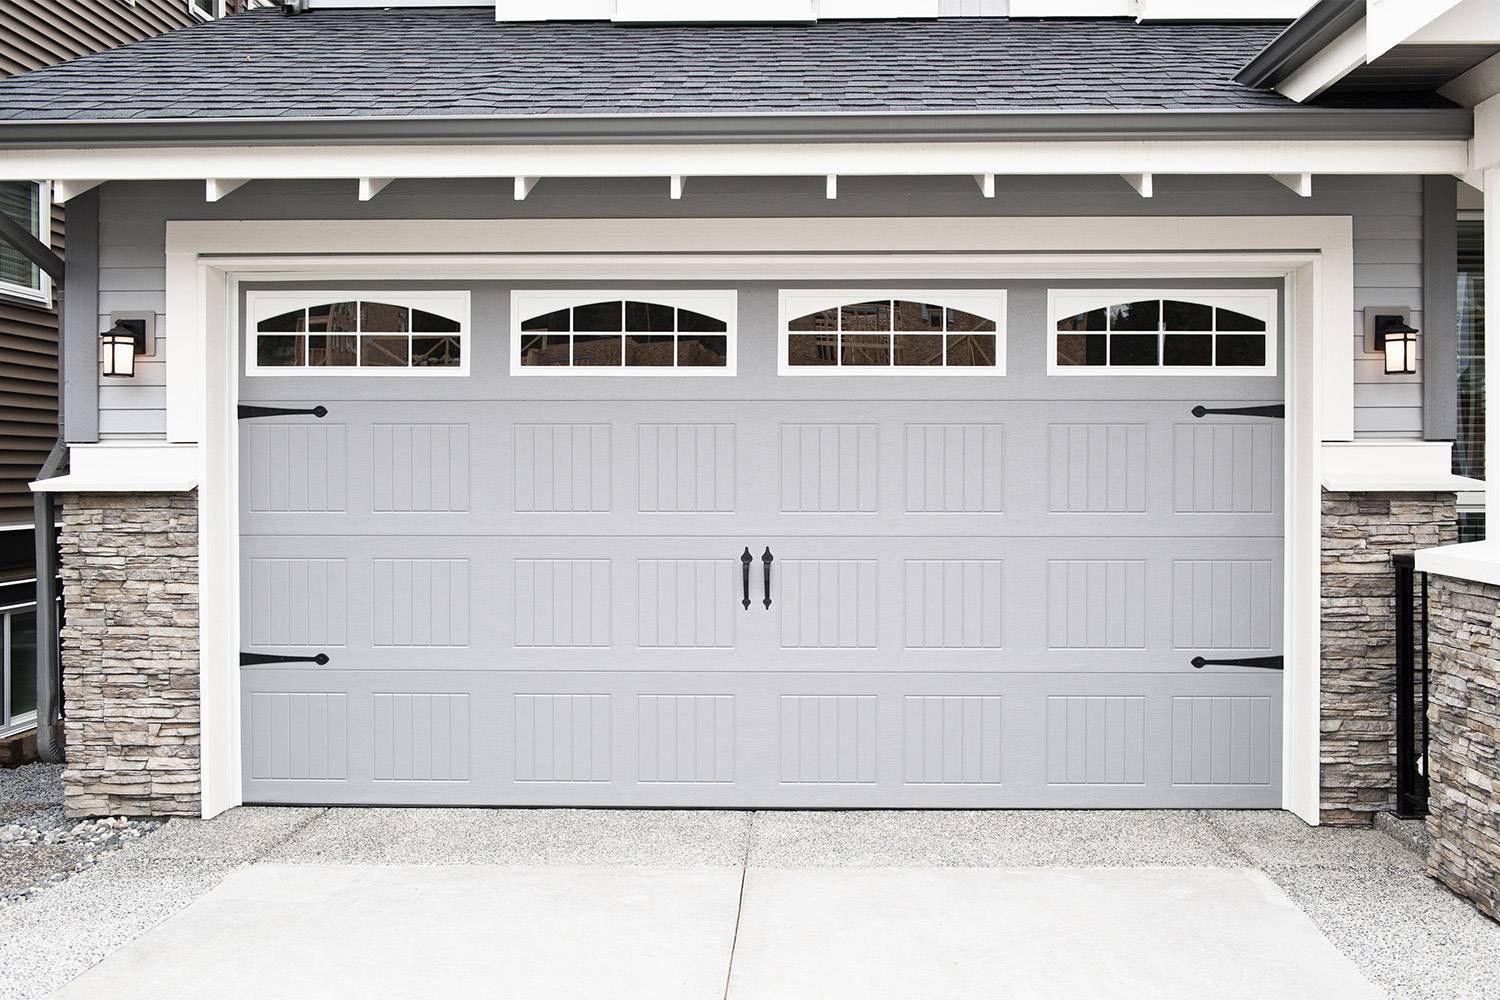 Learn More About Garage Doors for Your Home